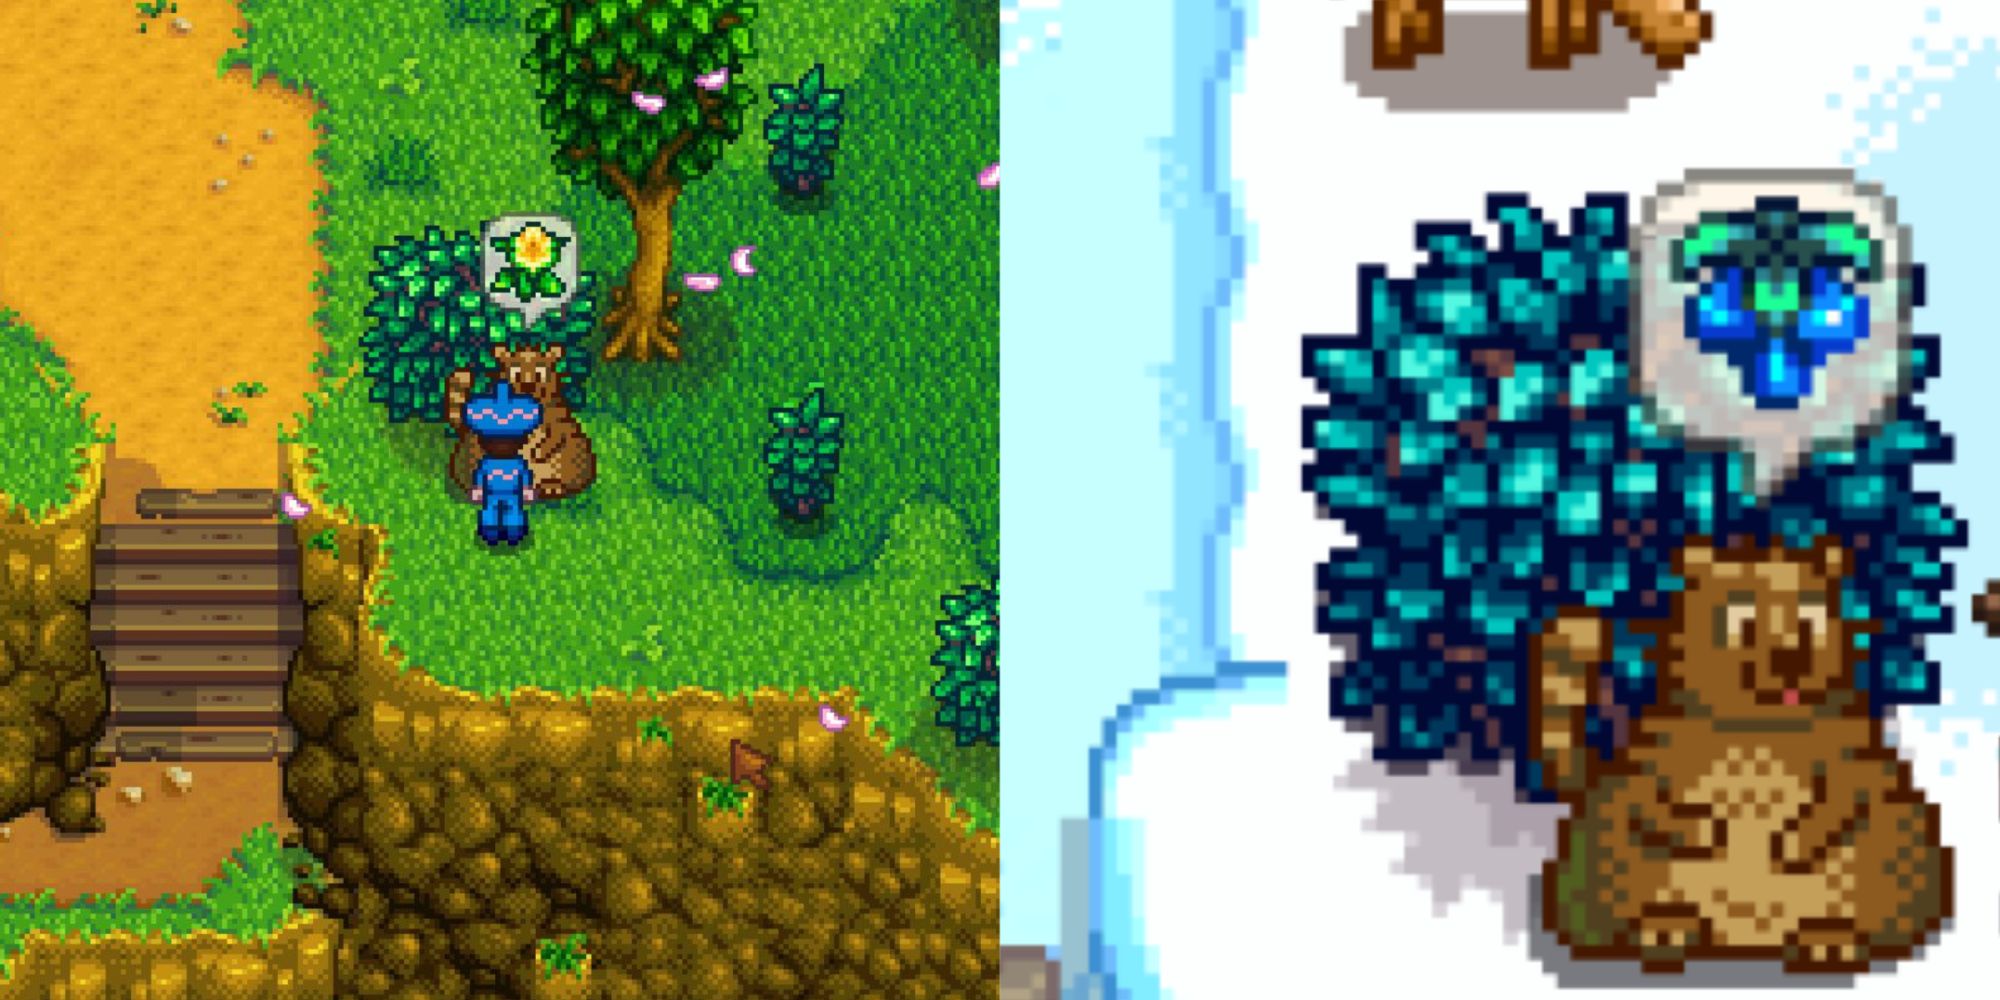 Trash Bear quests in Stardew Valley